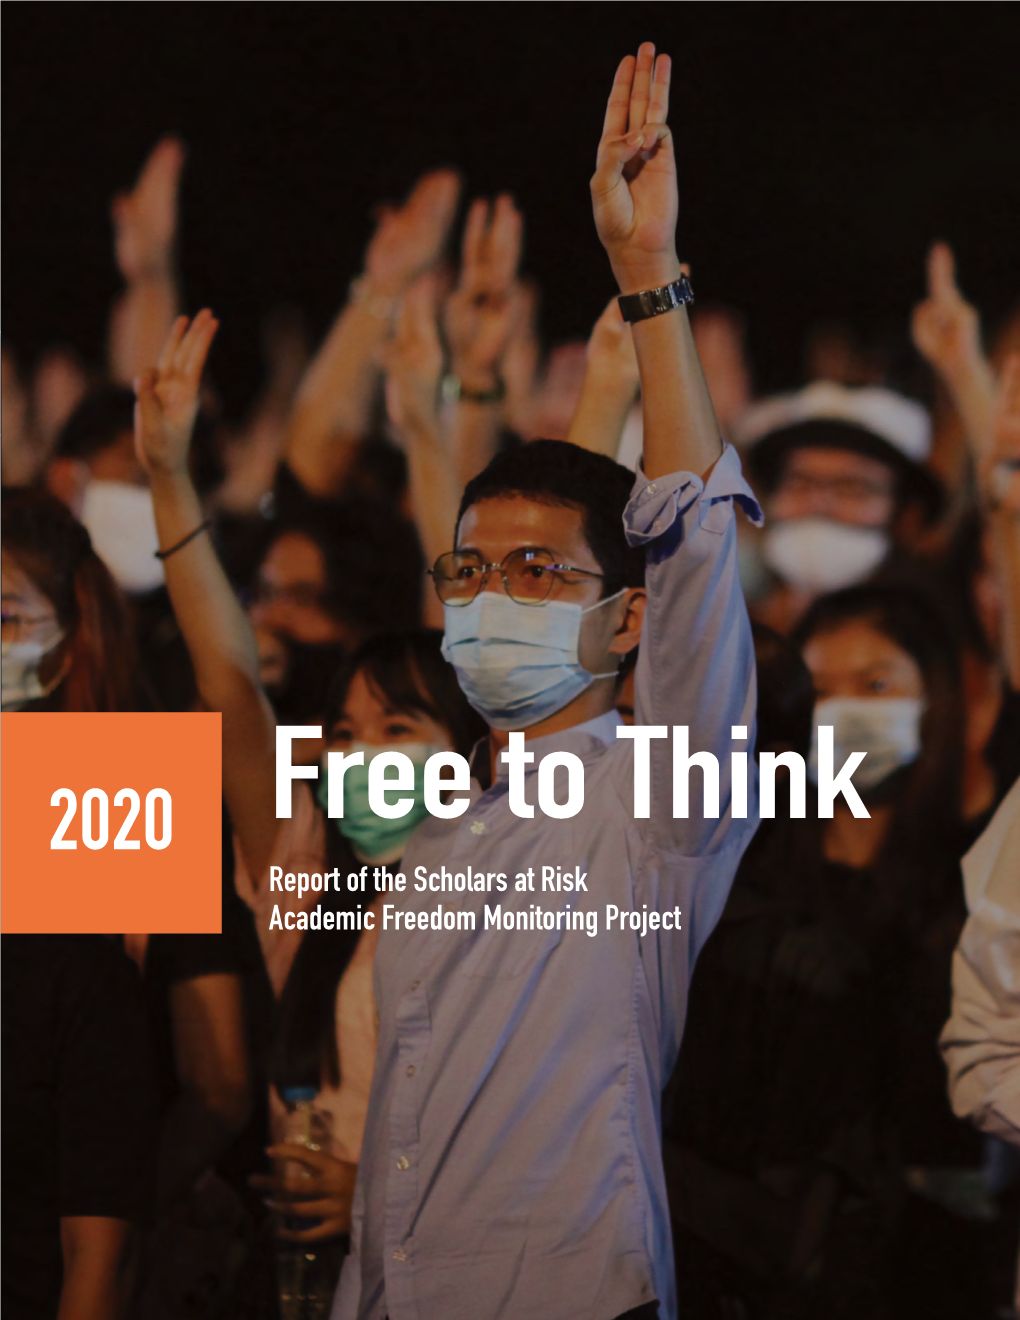 FREE to THINK 2020: Report of the Scholars at Risk Academic Freedom Monitoring Project